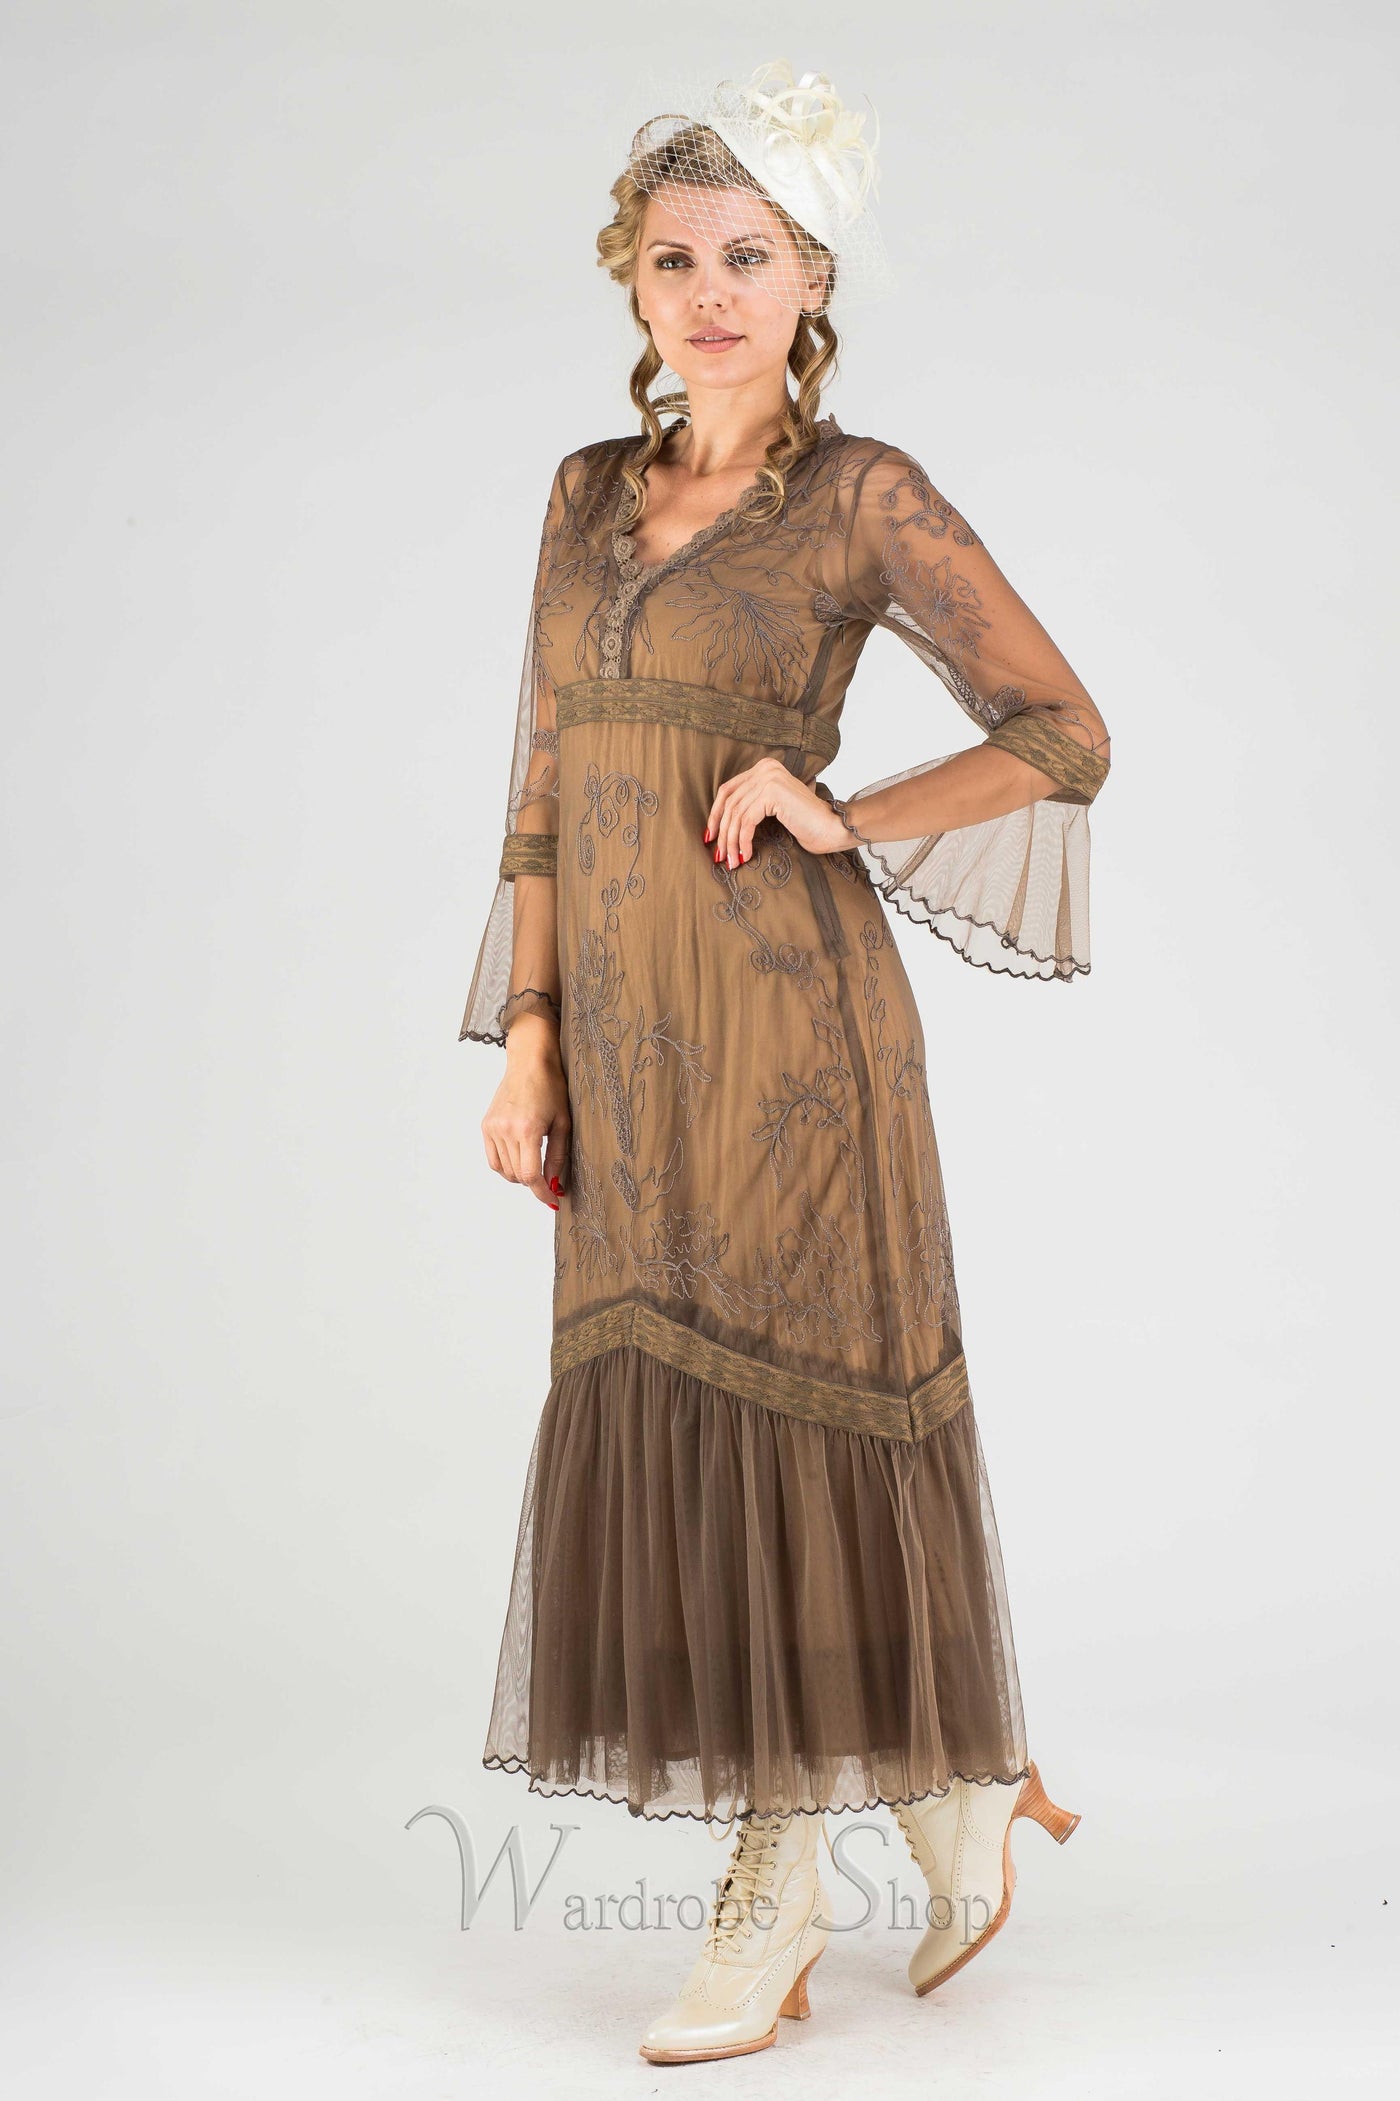 "Dark Romance" Vintage Inspired Party Dress in Antique by Nataya - SOLD OUT